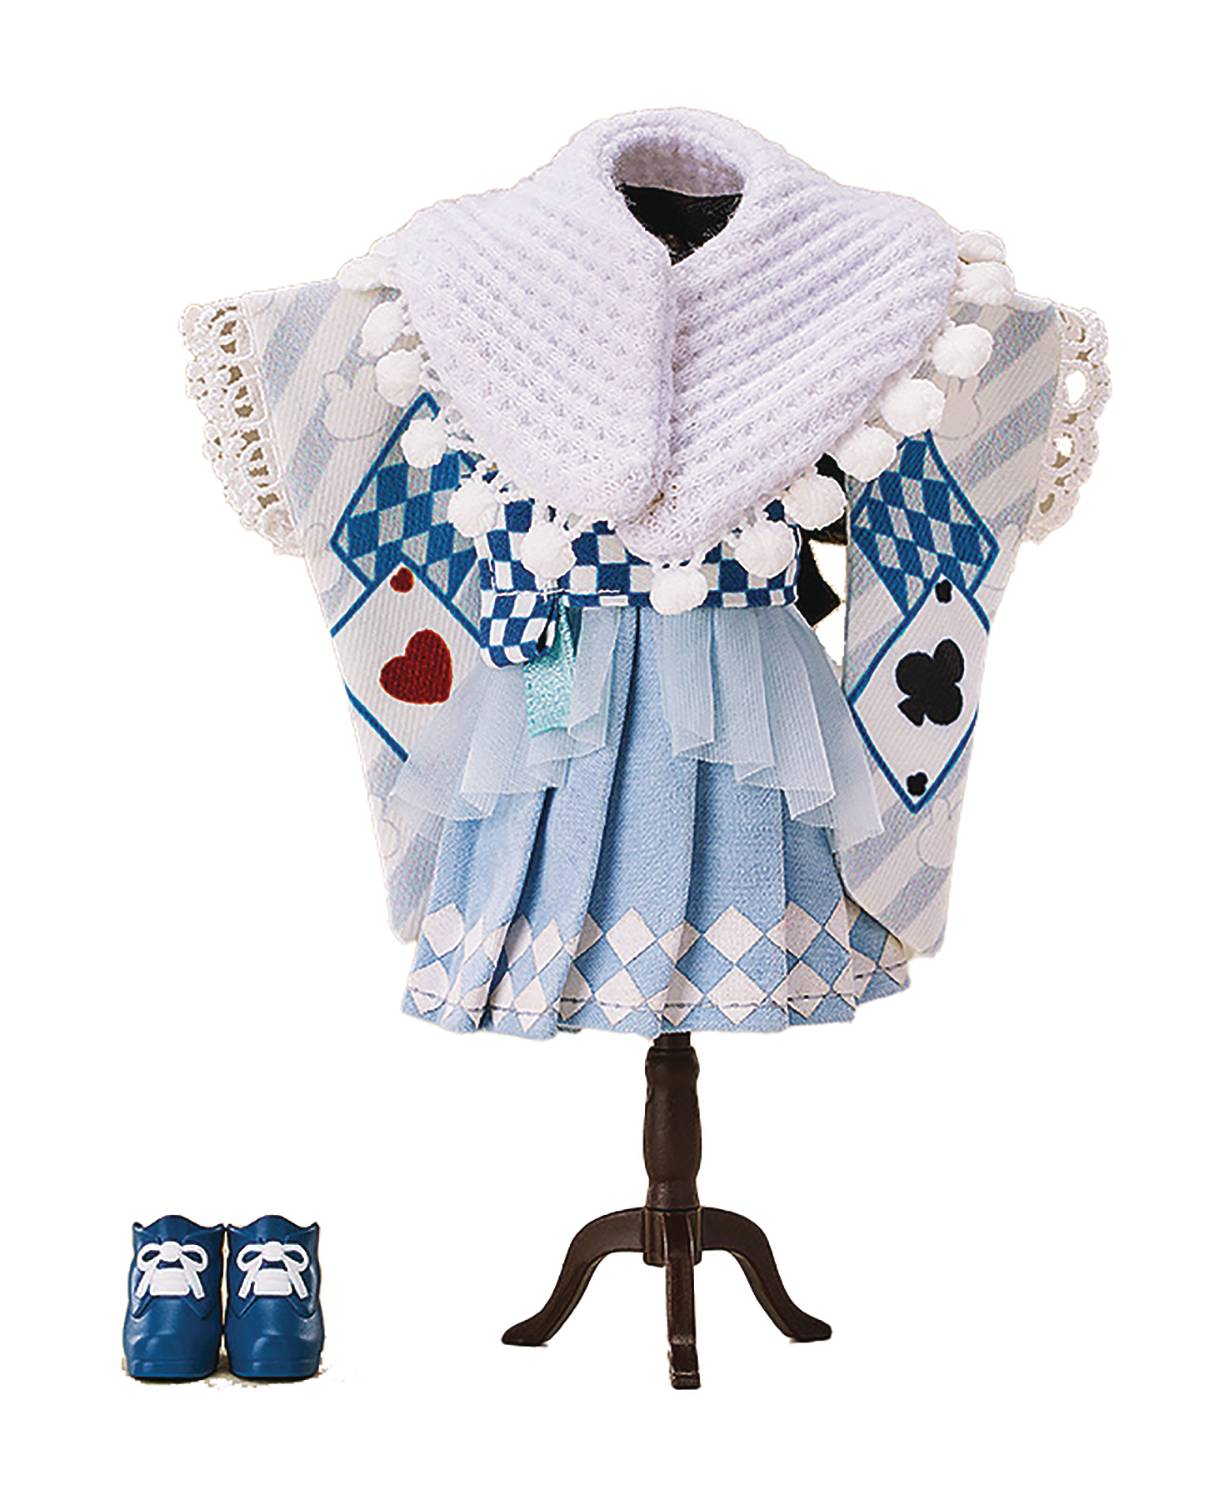 NENDOROID DOLL OUTFIT SET ALICE JAPANESE DRESS VER (MAY22889